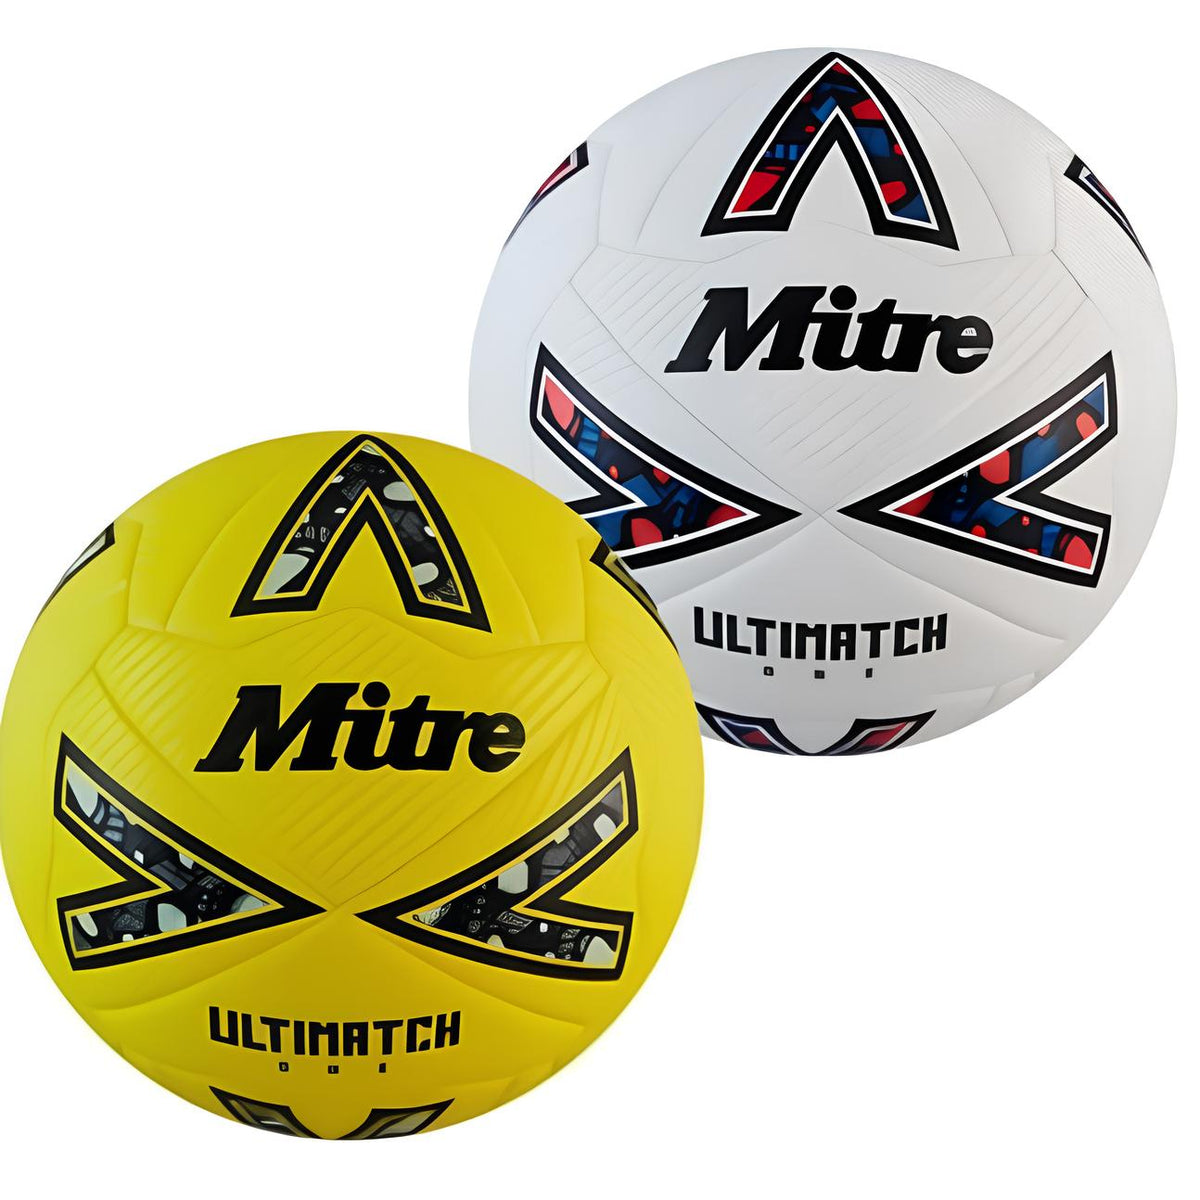 MITRE ULTIMATCH ONE FOOTBALLS ADULTS KIDS BALL OUTDOOR INDOOR ASTRO PLAY TRAIN